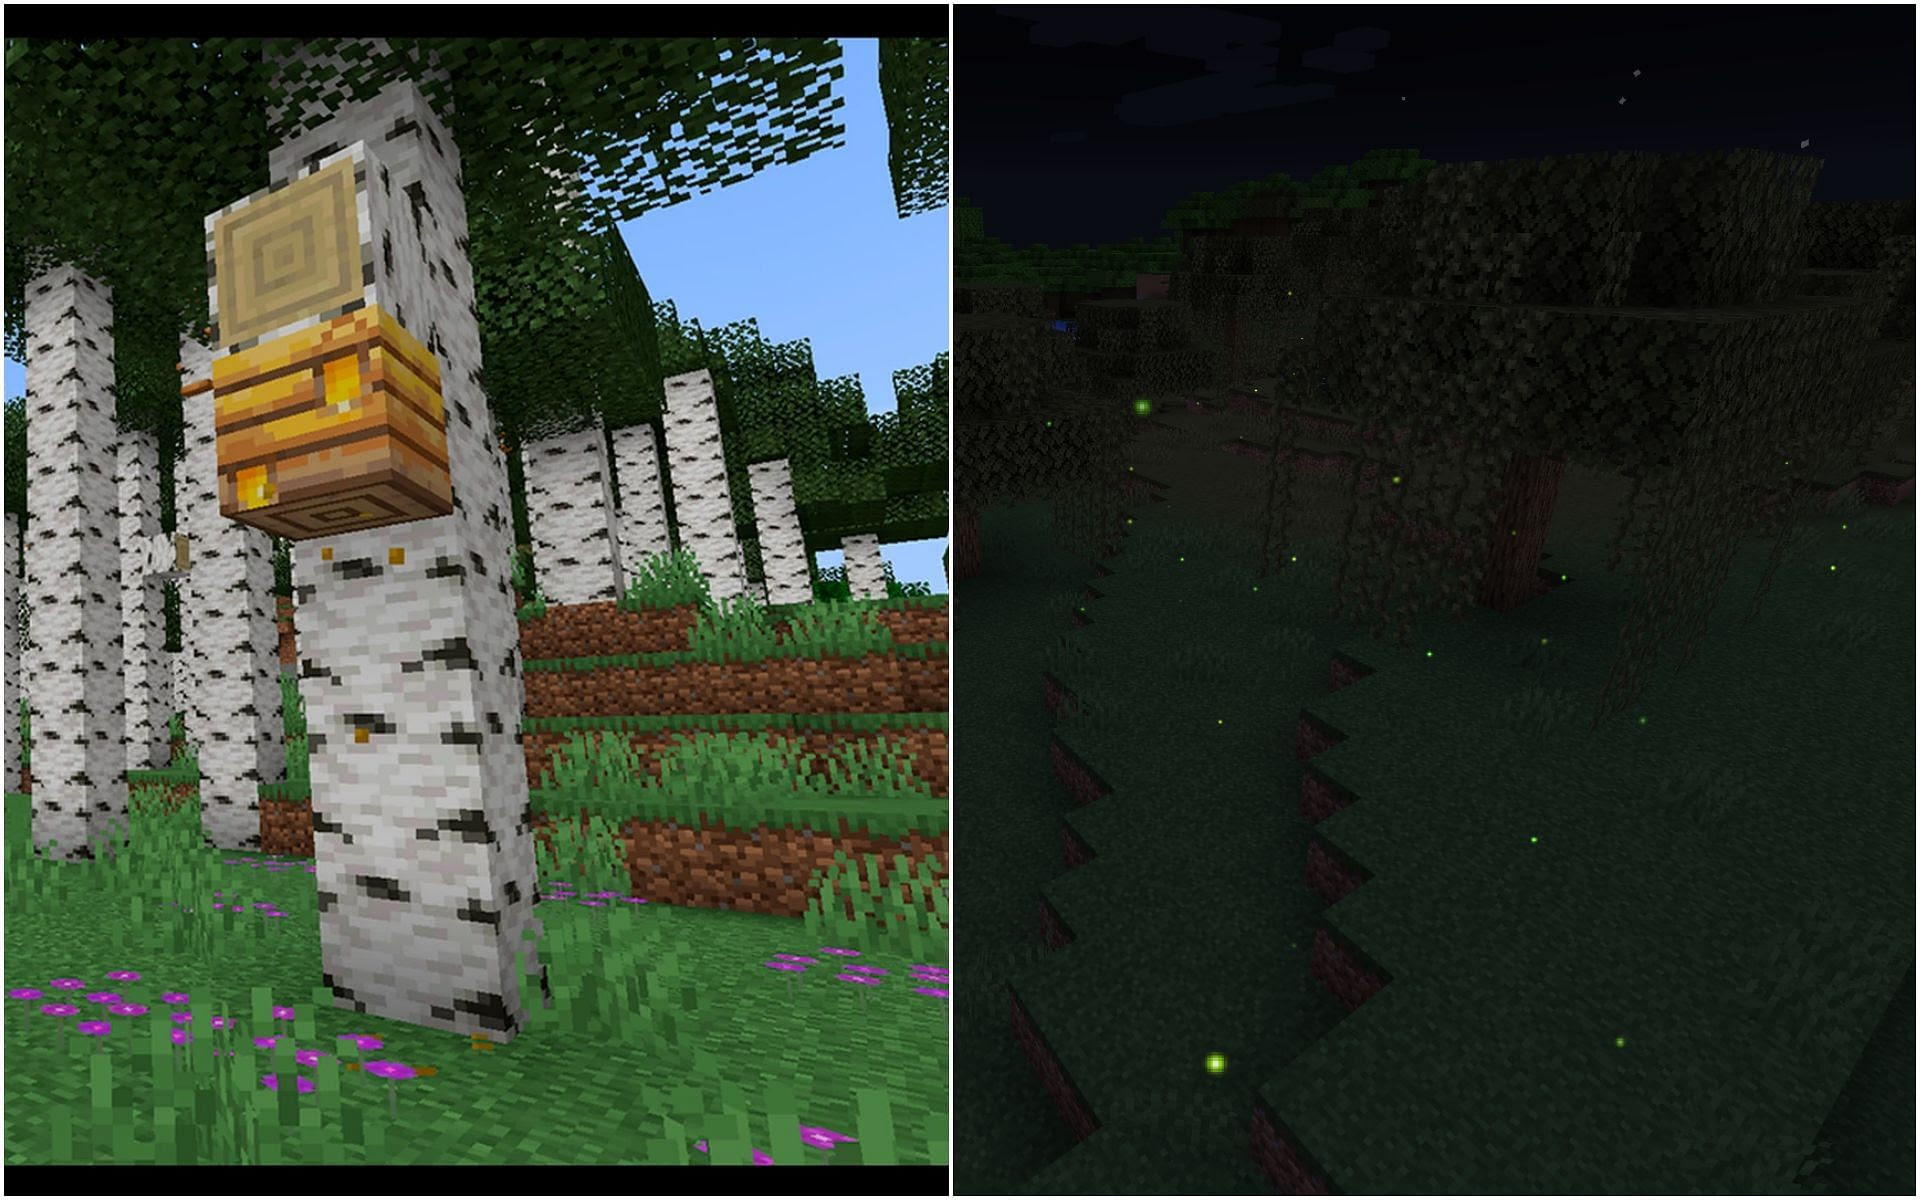 How to get Birch Forest and Fireflies custom mod for Minecraft?